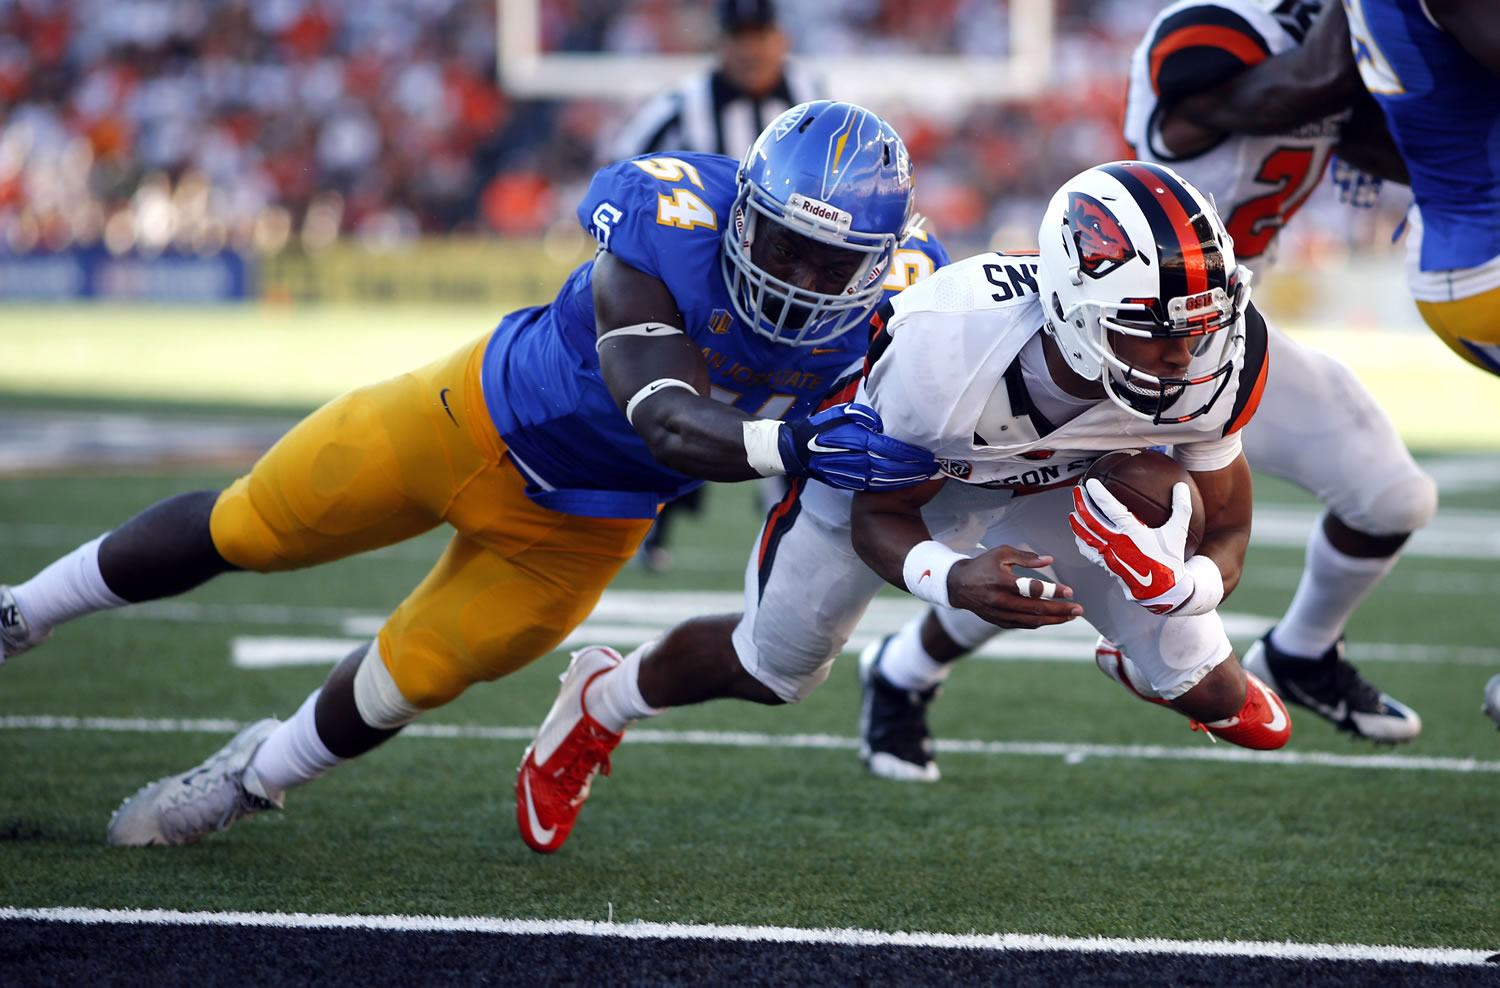 Oregon State's Seth Collins, right, dives past San Jose State's Epie Sona, left, for a touchdown during the first half in Corvallis, Ore., Saturday, Sept. 19, 2015. (AP Photo/Timothy J.